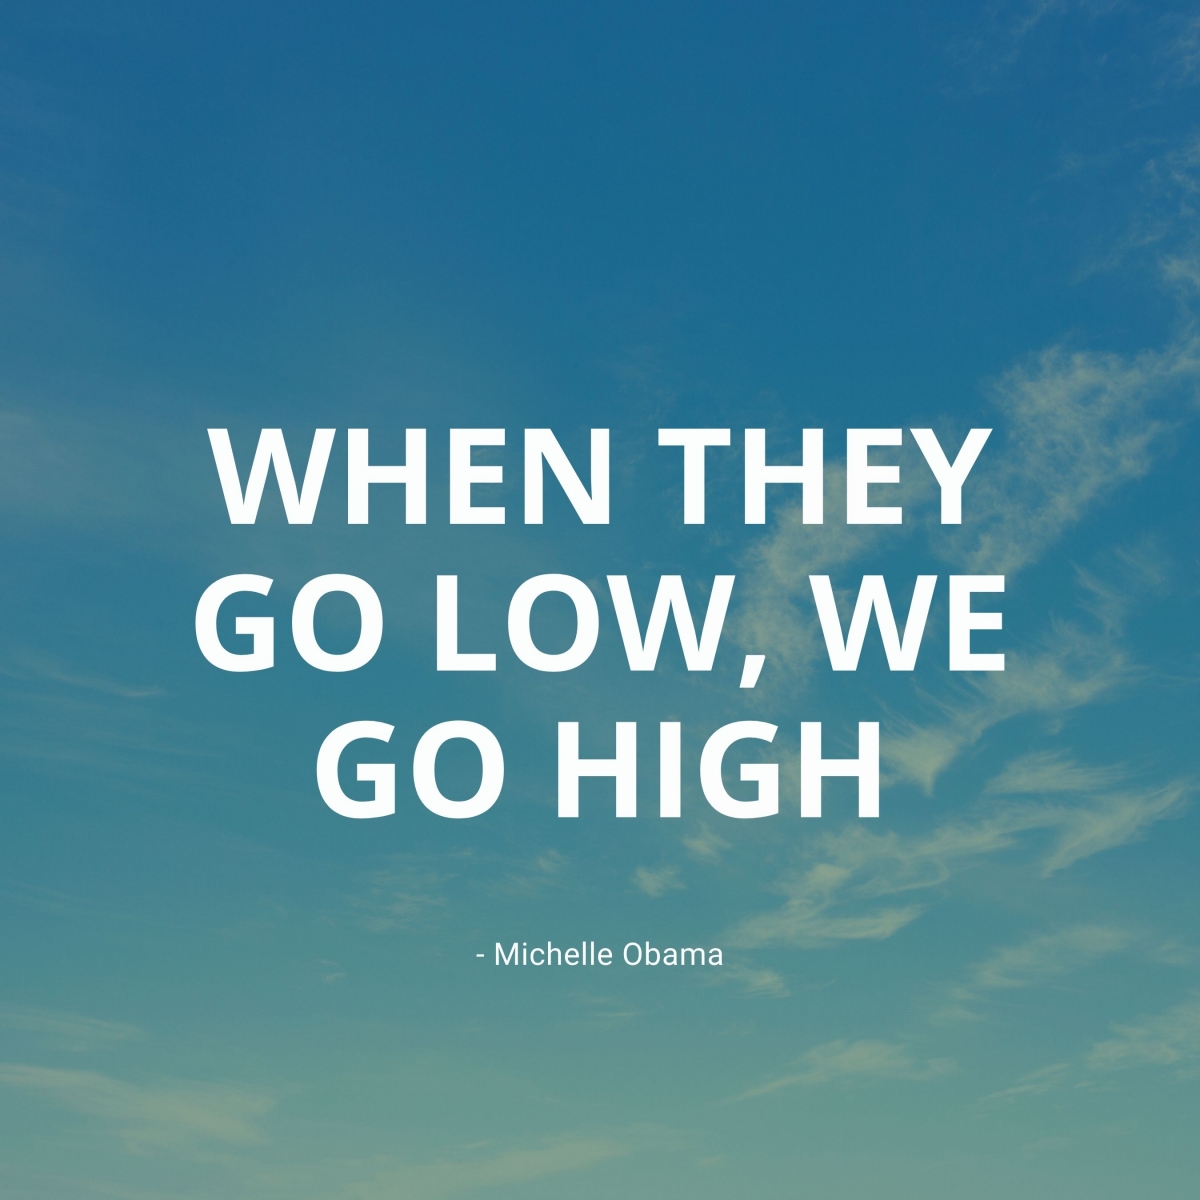 Why We Go High, When They Go Low